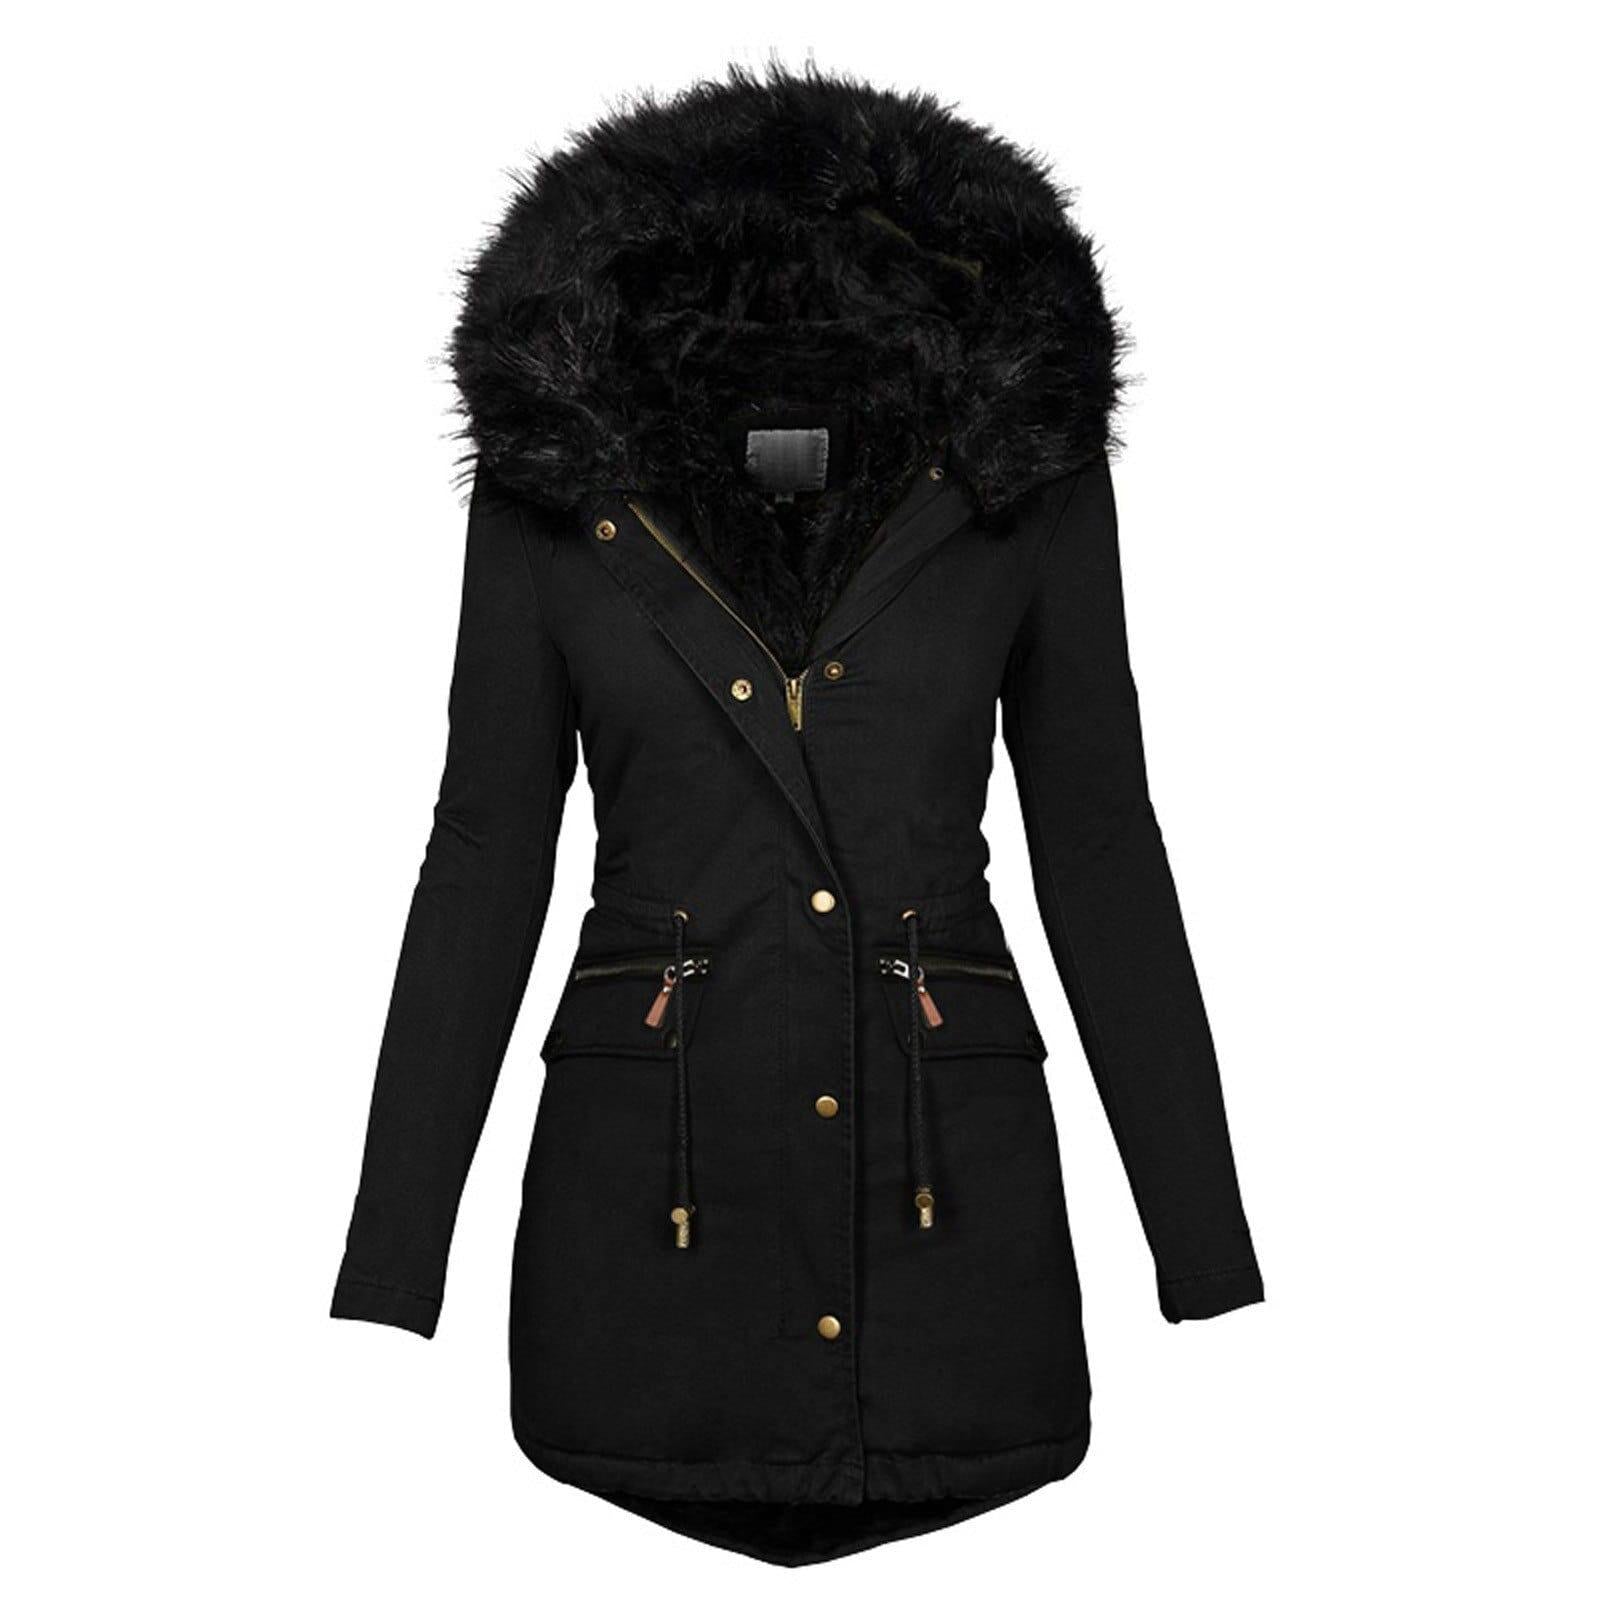 7 BENEFITS OF WEARING COATS IN WINTER – For Women USA